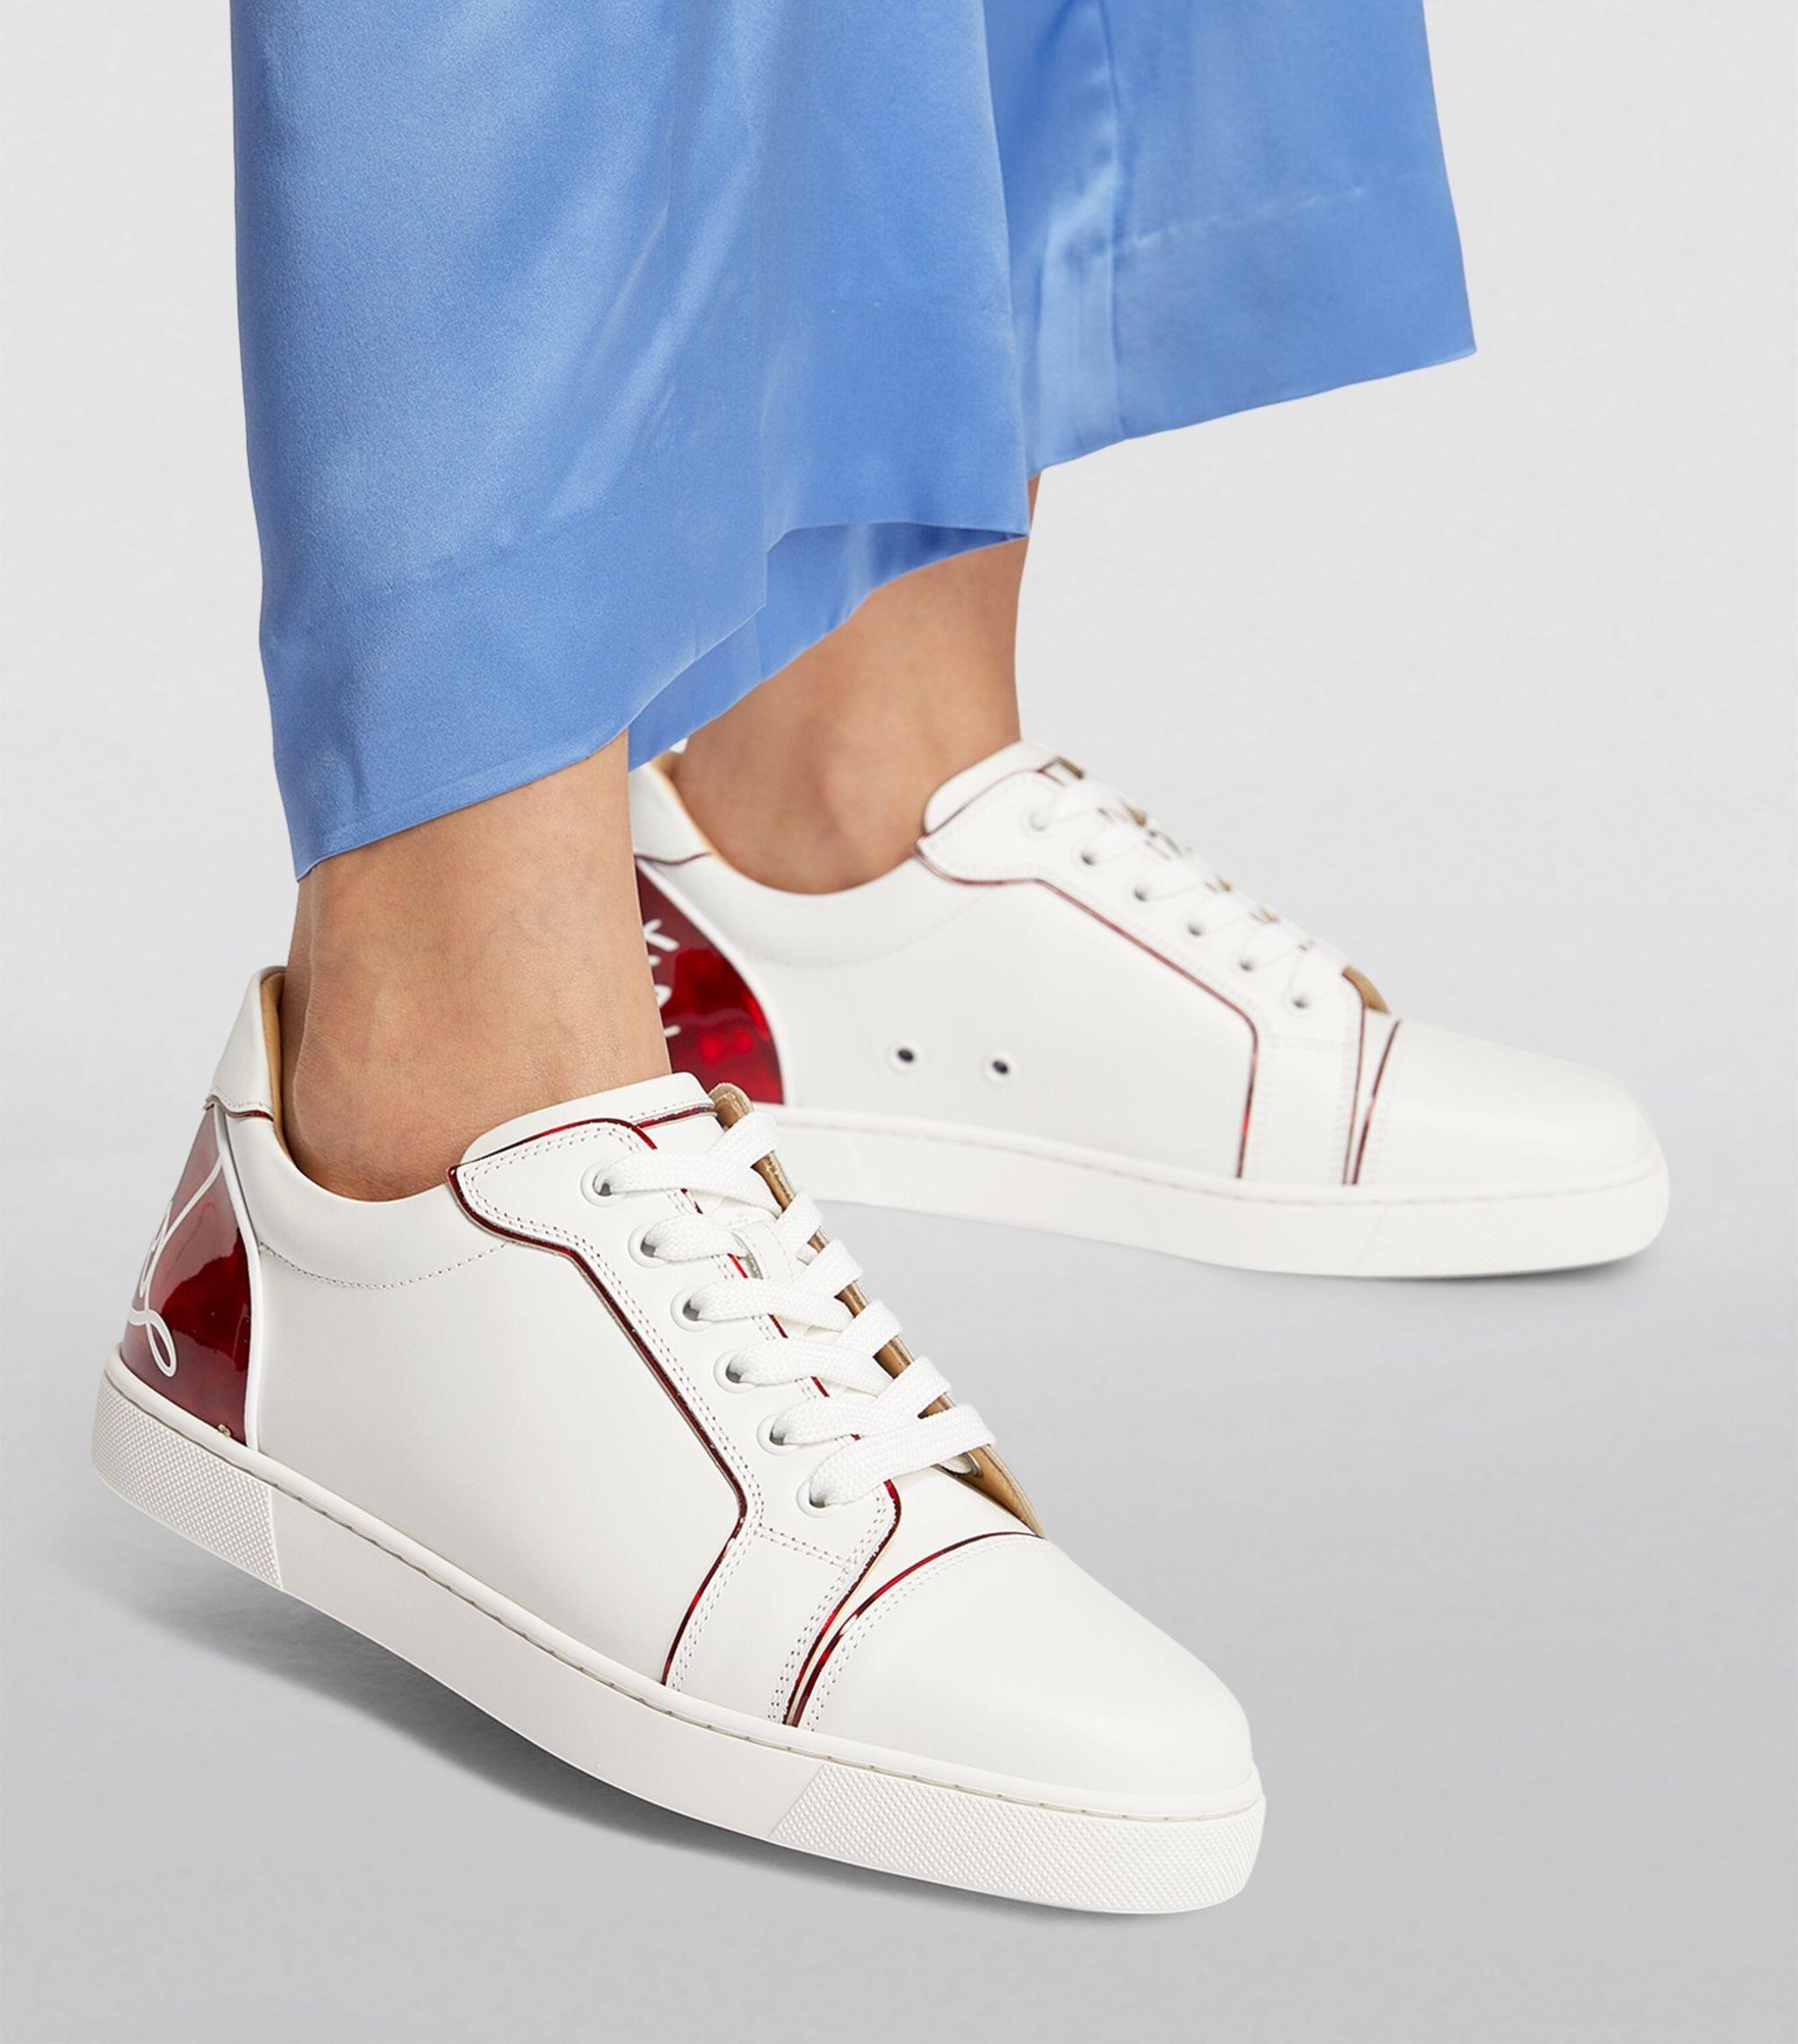 Christian Louboutin FUN VIEIRA Leather Signature Low Top Sneakers Shoes  $895